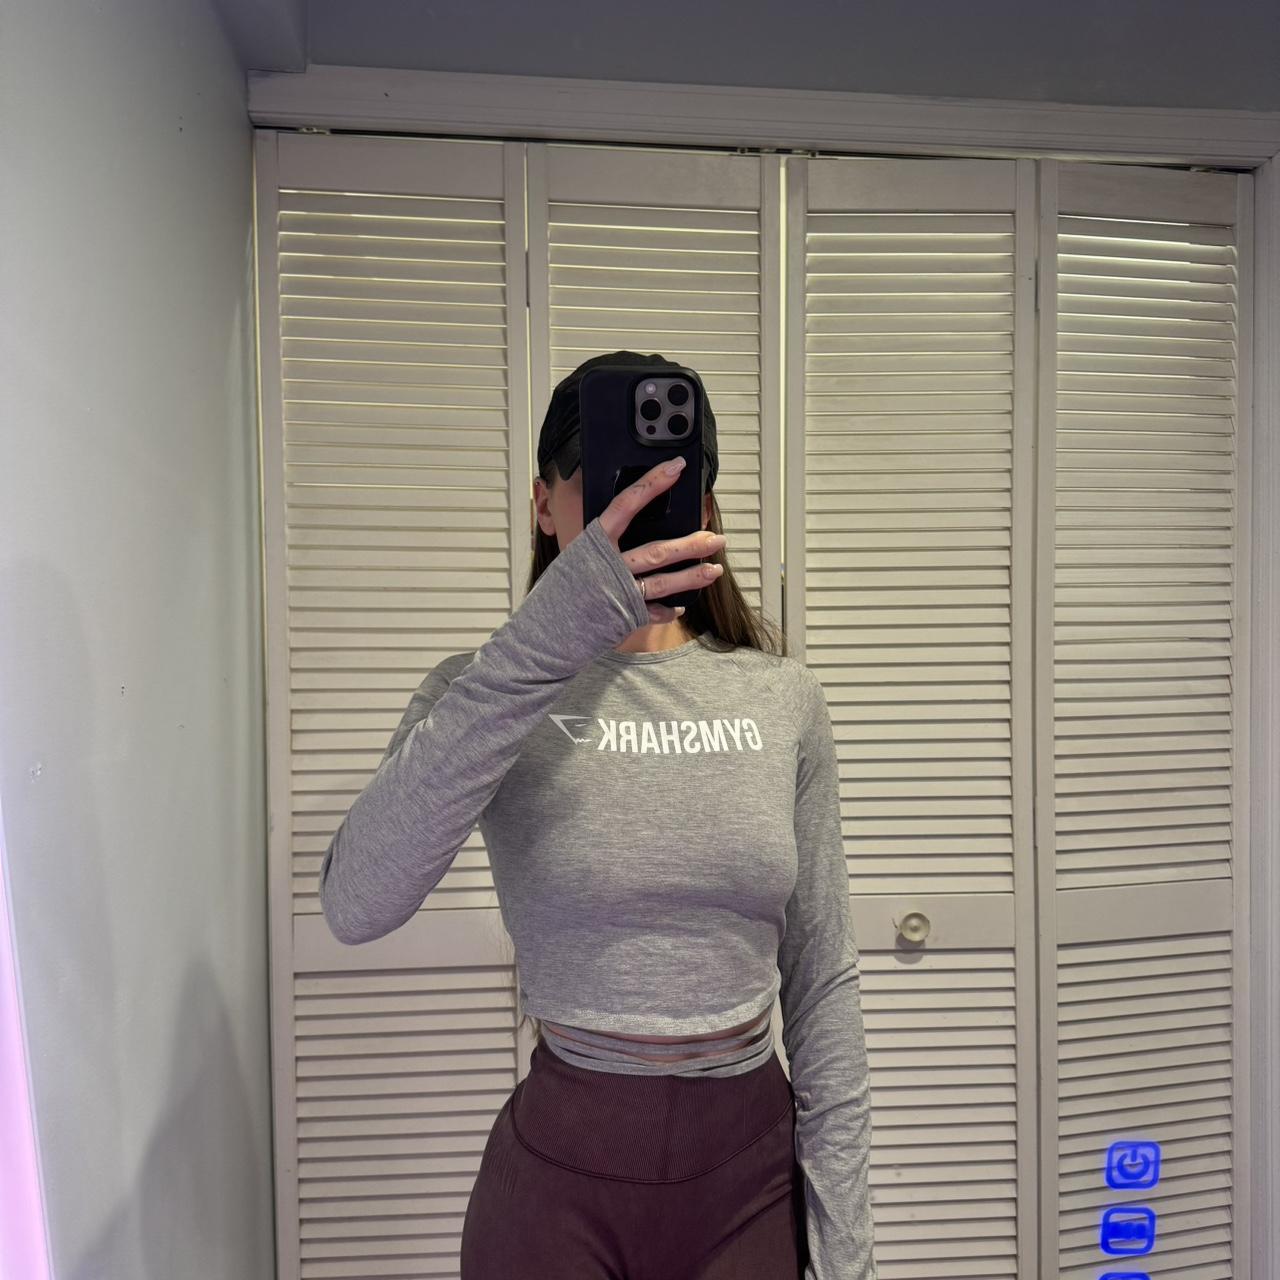 Gymshark Ribbon Tie Cropped Top in Taupe Pink XS Fit - Depop